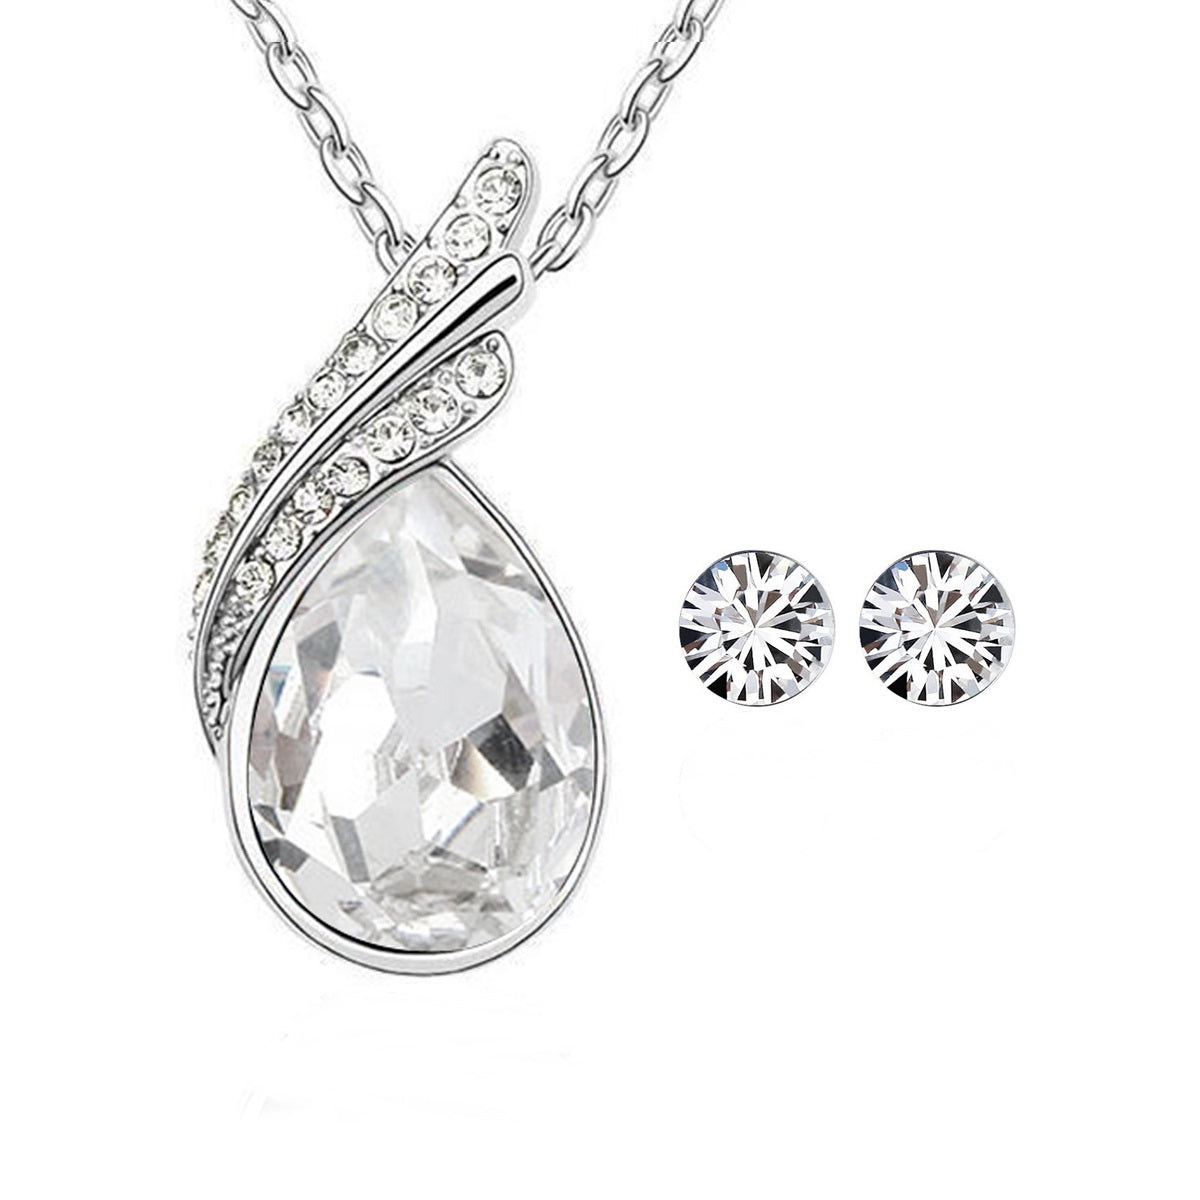 Wrapables Elegant Teardrop Crystal Pendant Necklace and Stud Earrings Jewelry Set